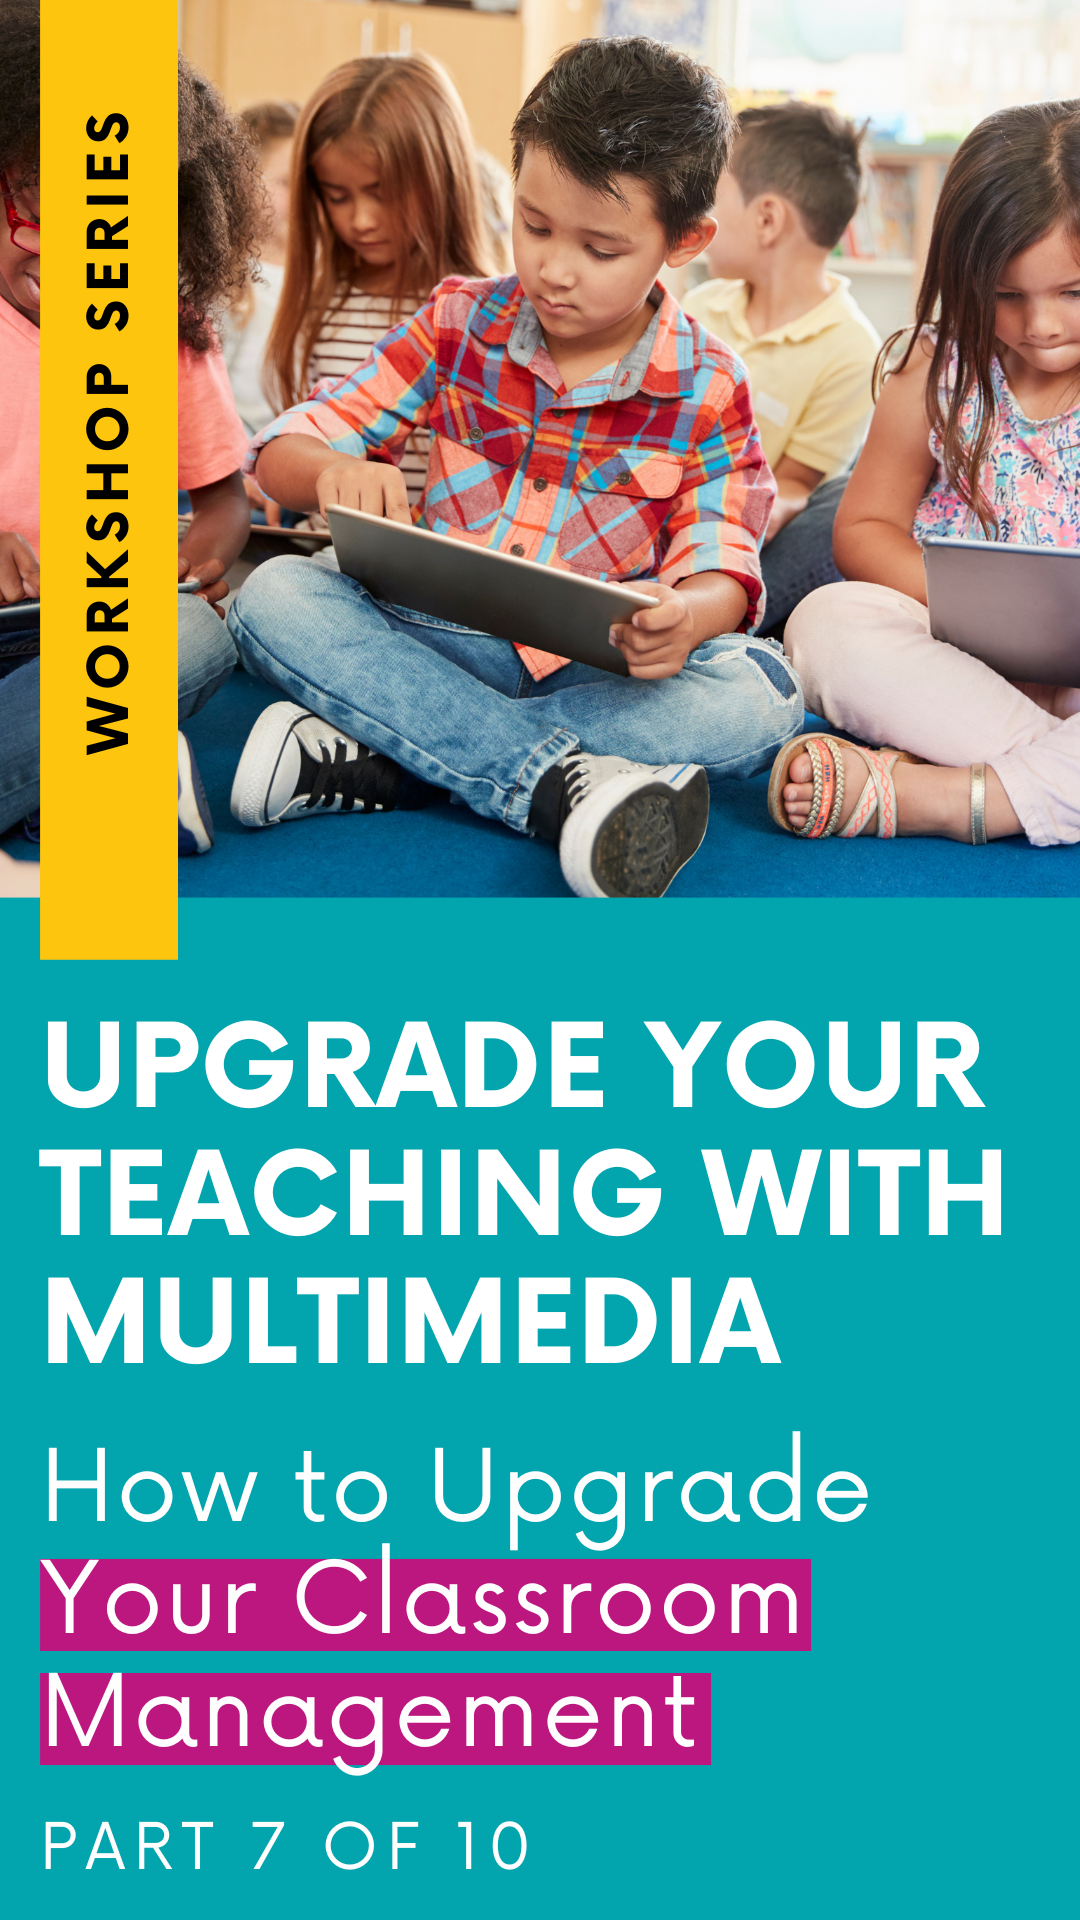 Upgrade Your Classroom Management (From the Upgrade Your Teaching with Multimedia Workshop Series: Part 7) (Copy)